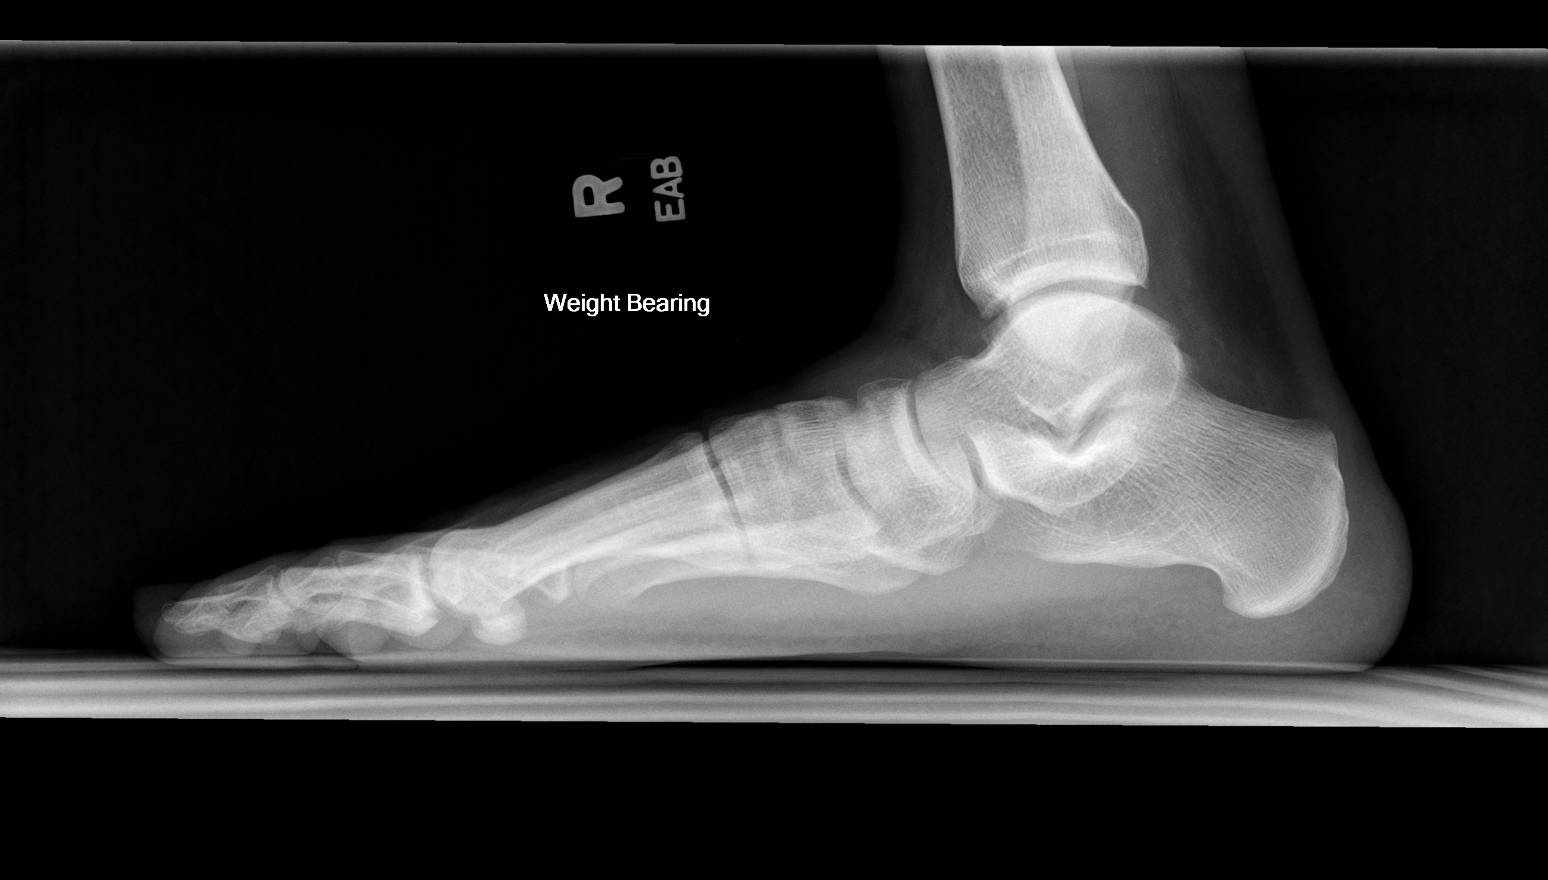 Single lateral radiograph demonstrating pes planus. No other abnormalities are visualized.